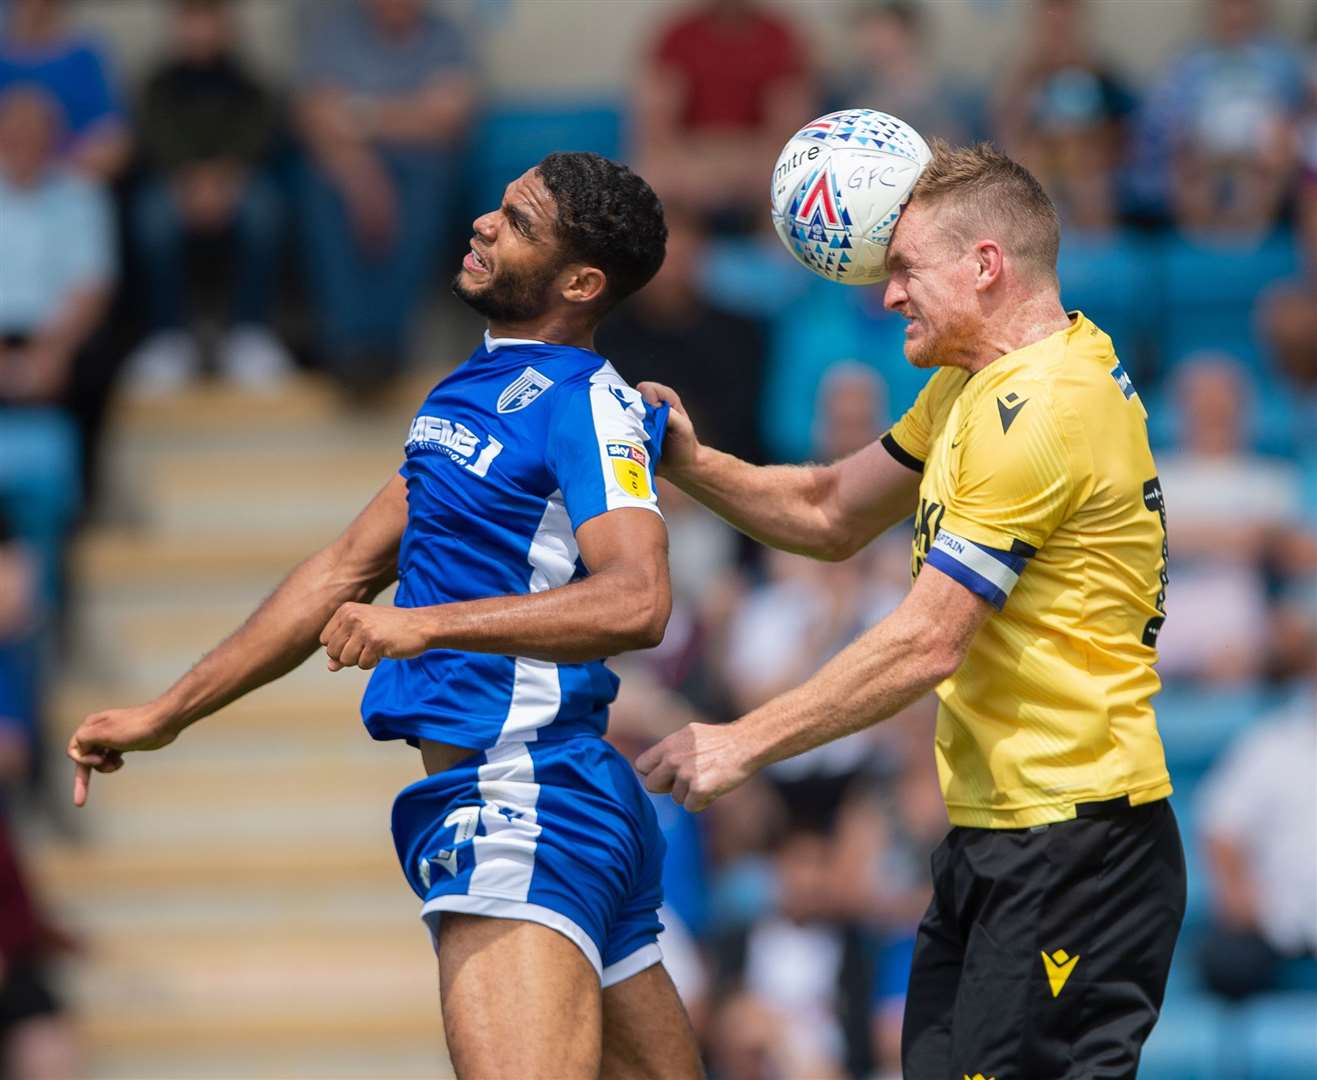 Gillingham trialist Mikael Mandron jumps with Millwall's Alex Pearce Picture: Ady Kerry